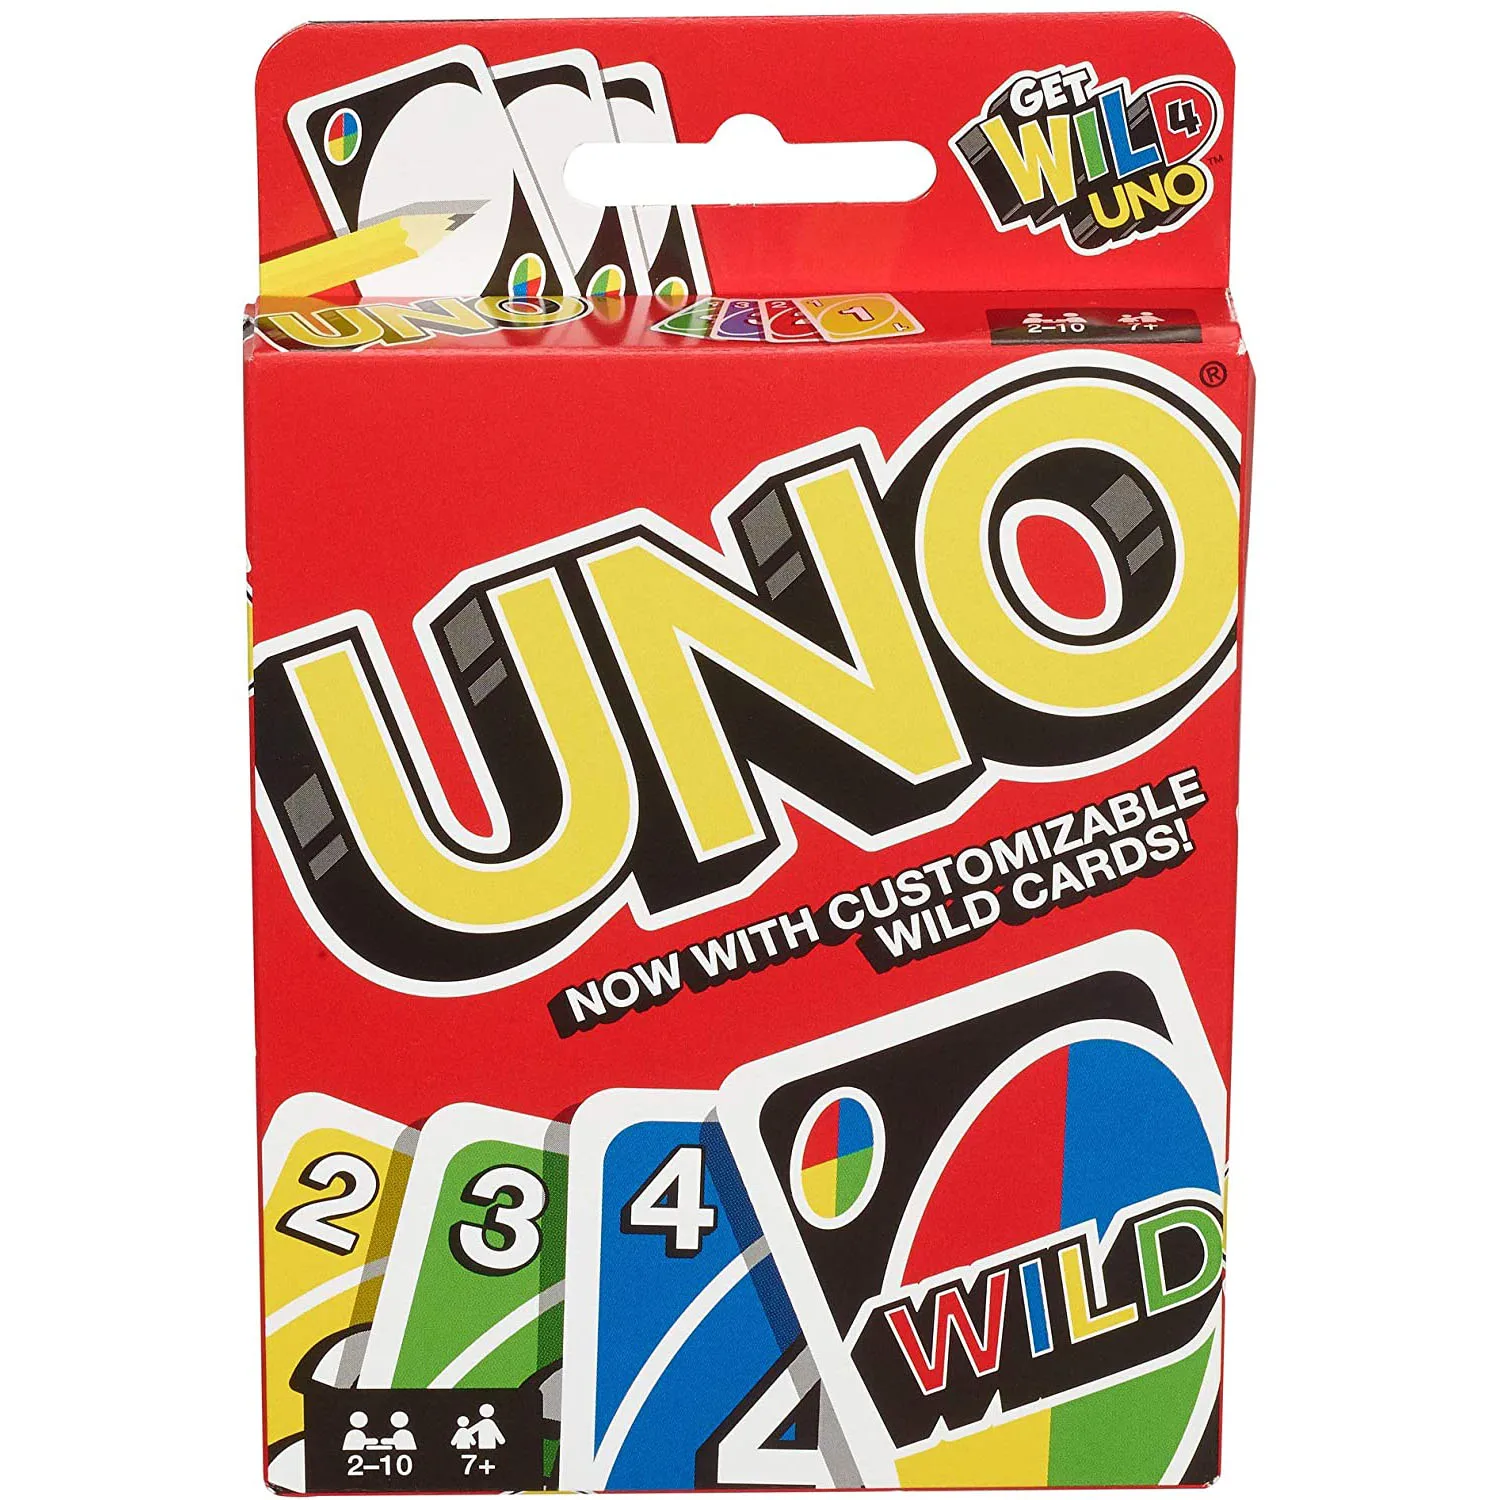 

Family Funny UNOS Card Game Entertainment Board Game Fun Poker Playing Cards Gift Box For Children And Adults